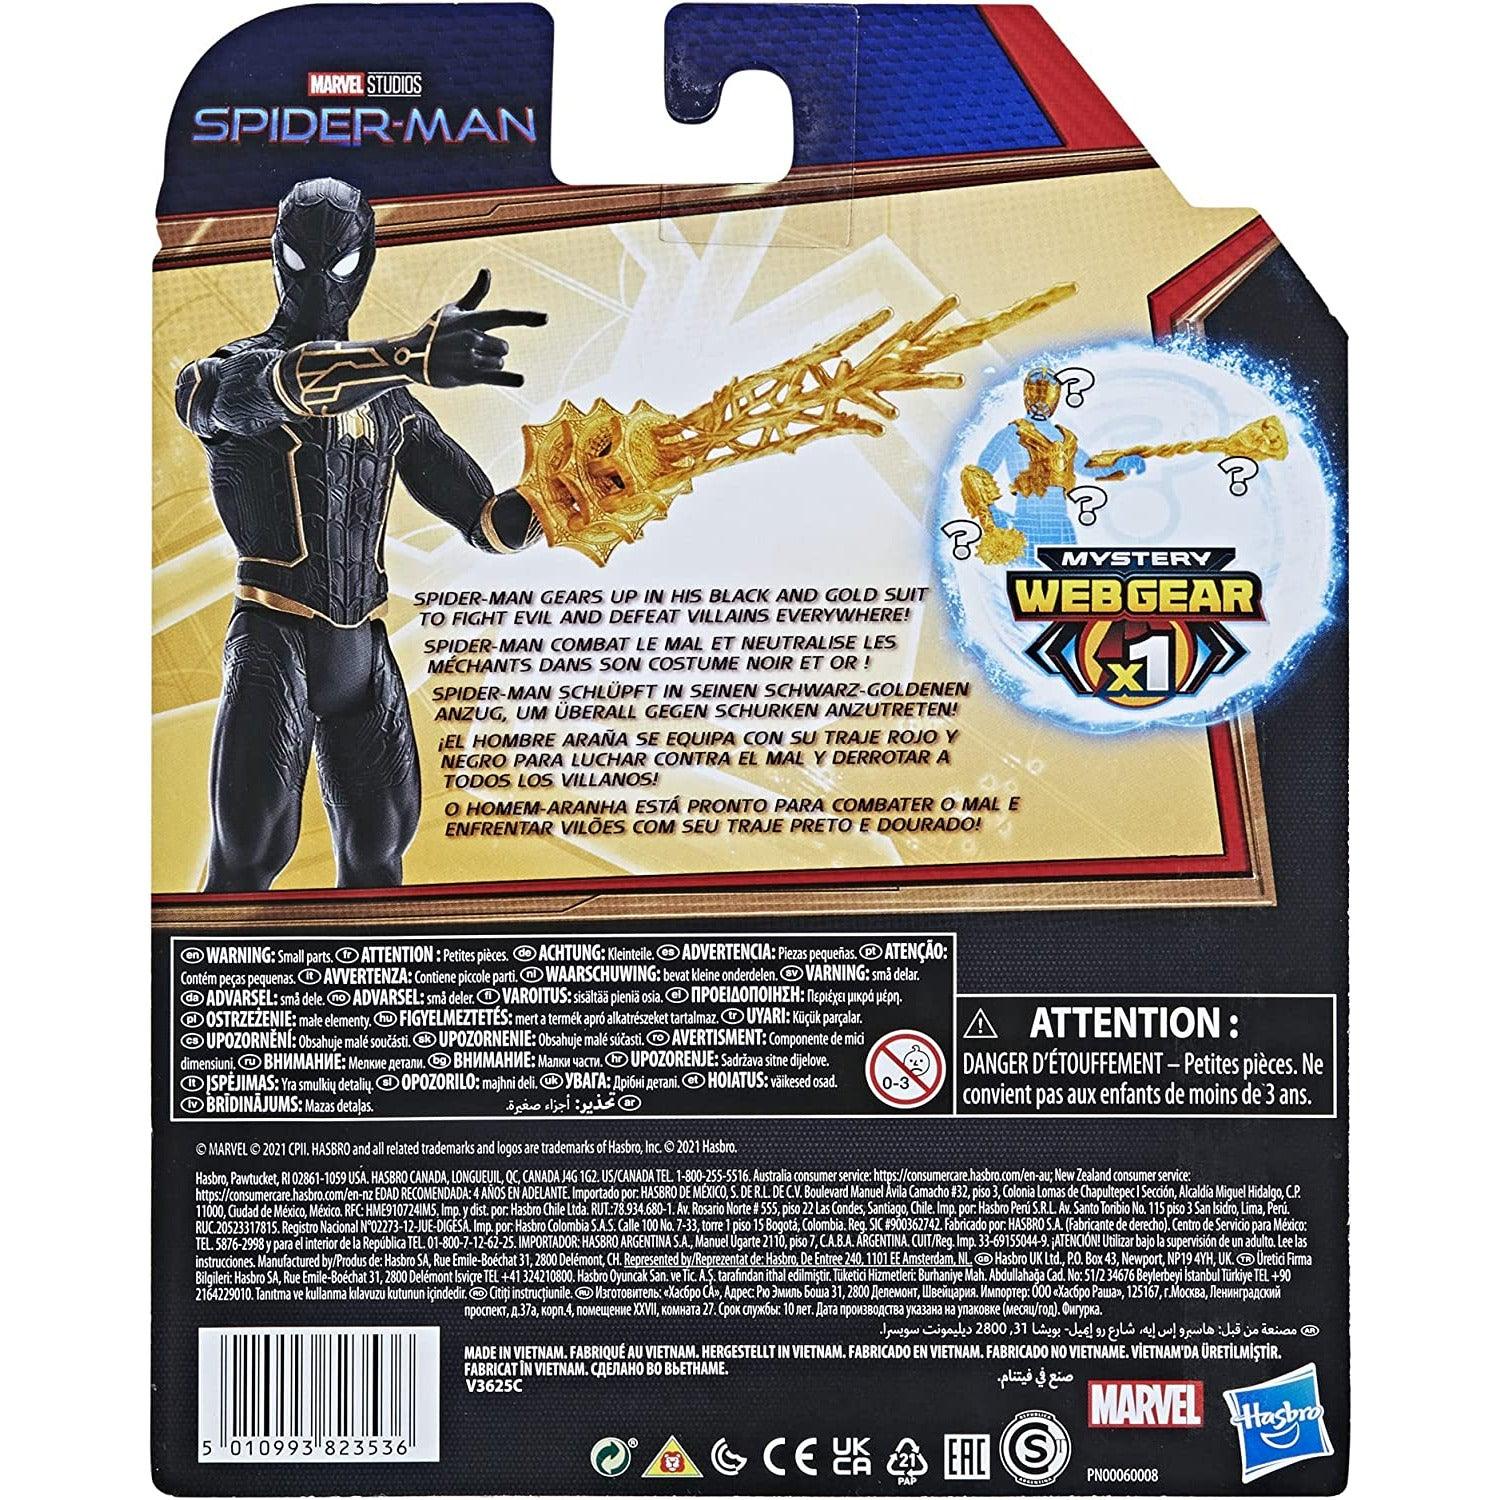 Hasbro Marvel Studios Spider-Man Mystery Web Gear Black and Gold Suit Action Figure - 6-Inch - BumbleToys - 5-7 Years, Action Figures, Avengers, Boys, Eagle Plus